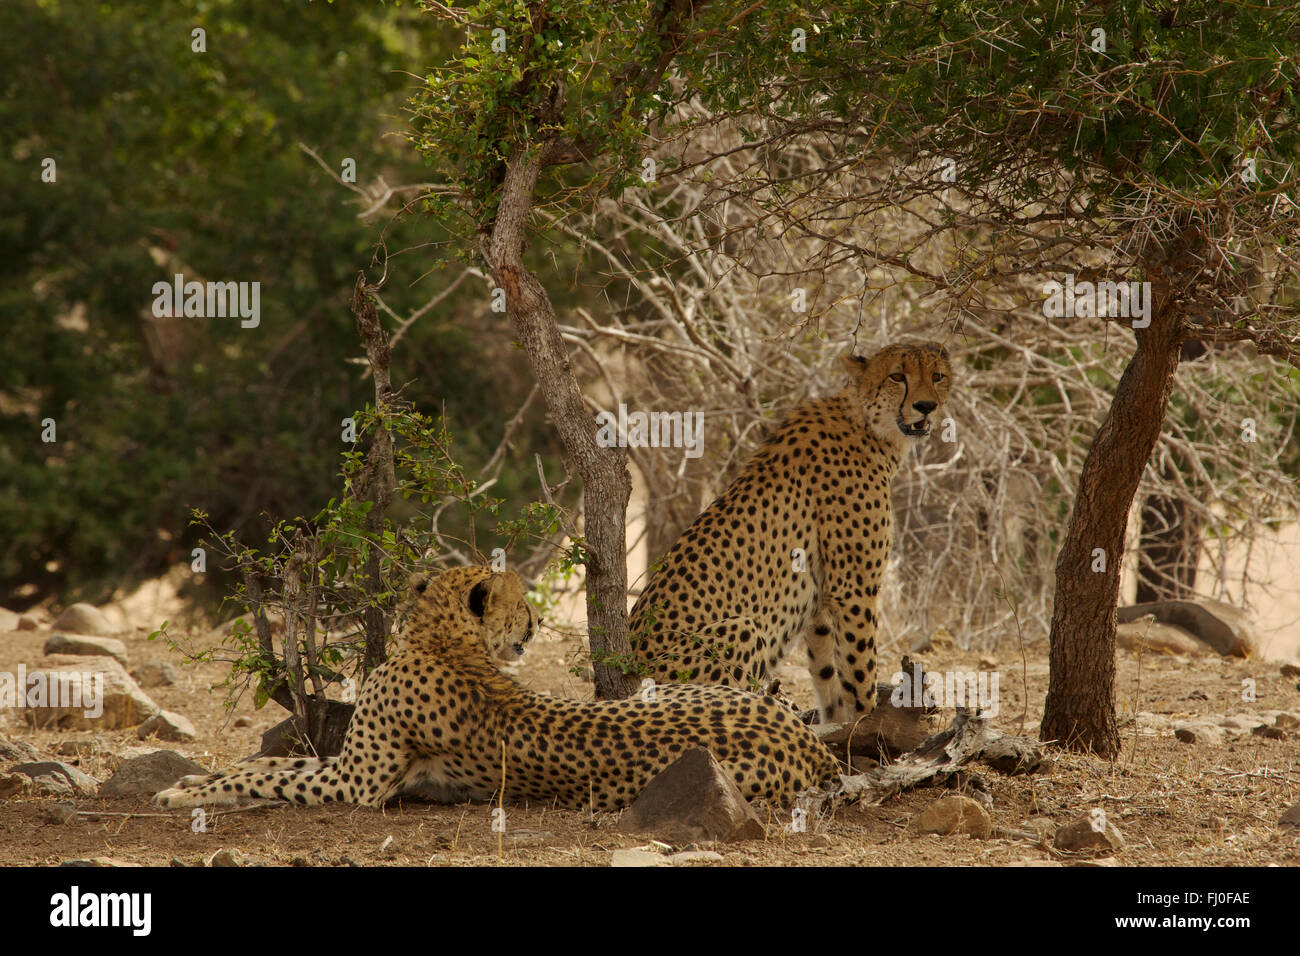 Pair of Cheetahs rest under tree in Kruger National Park, South Africa. Stock Photo